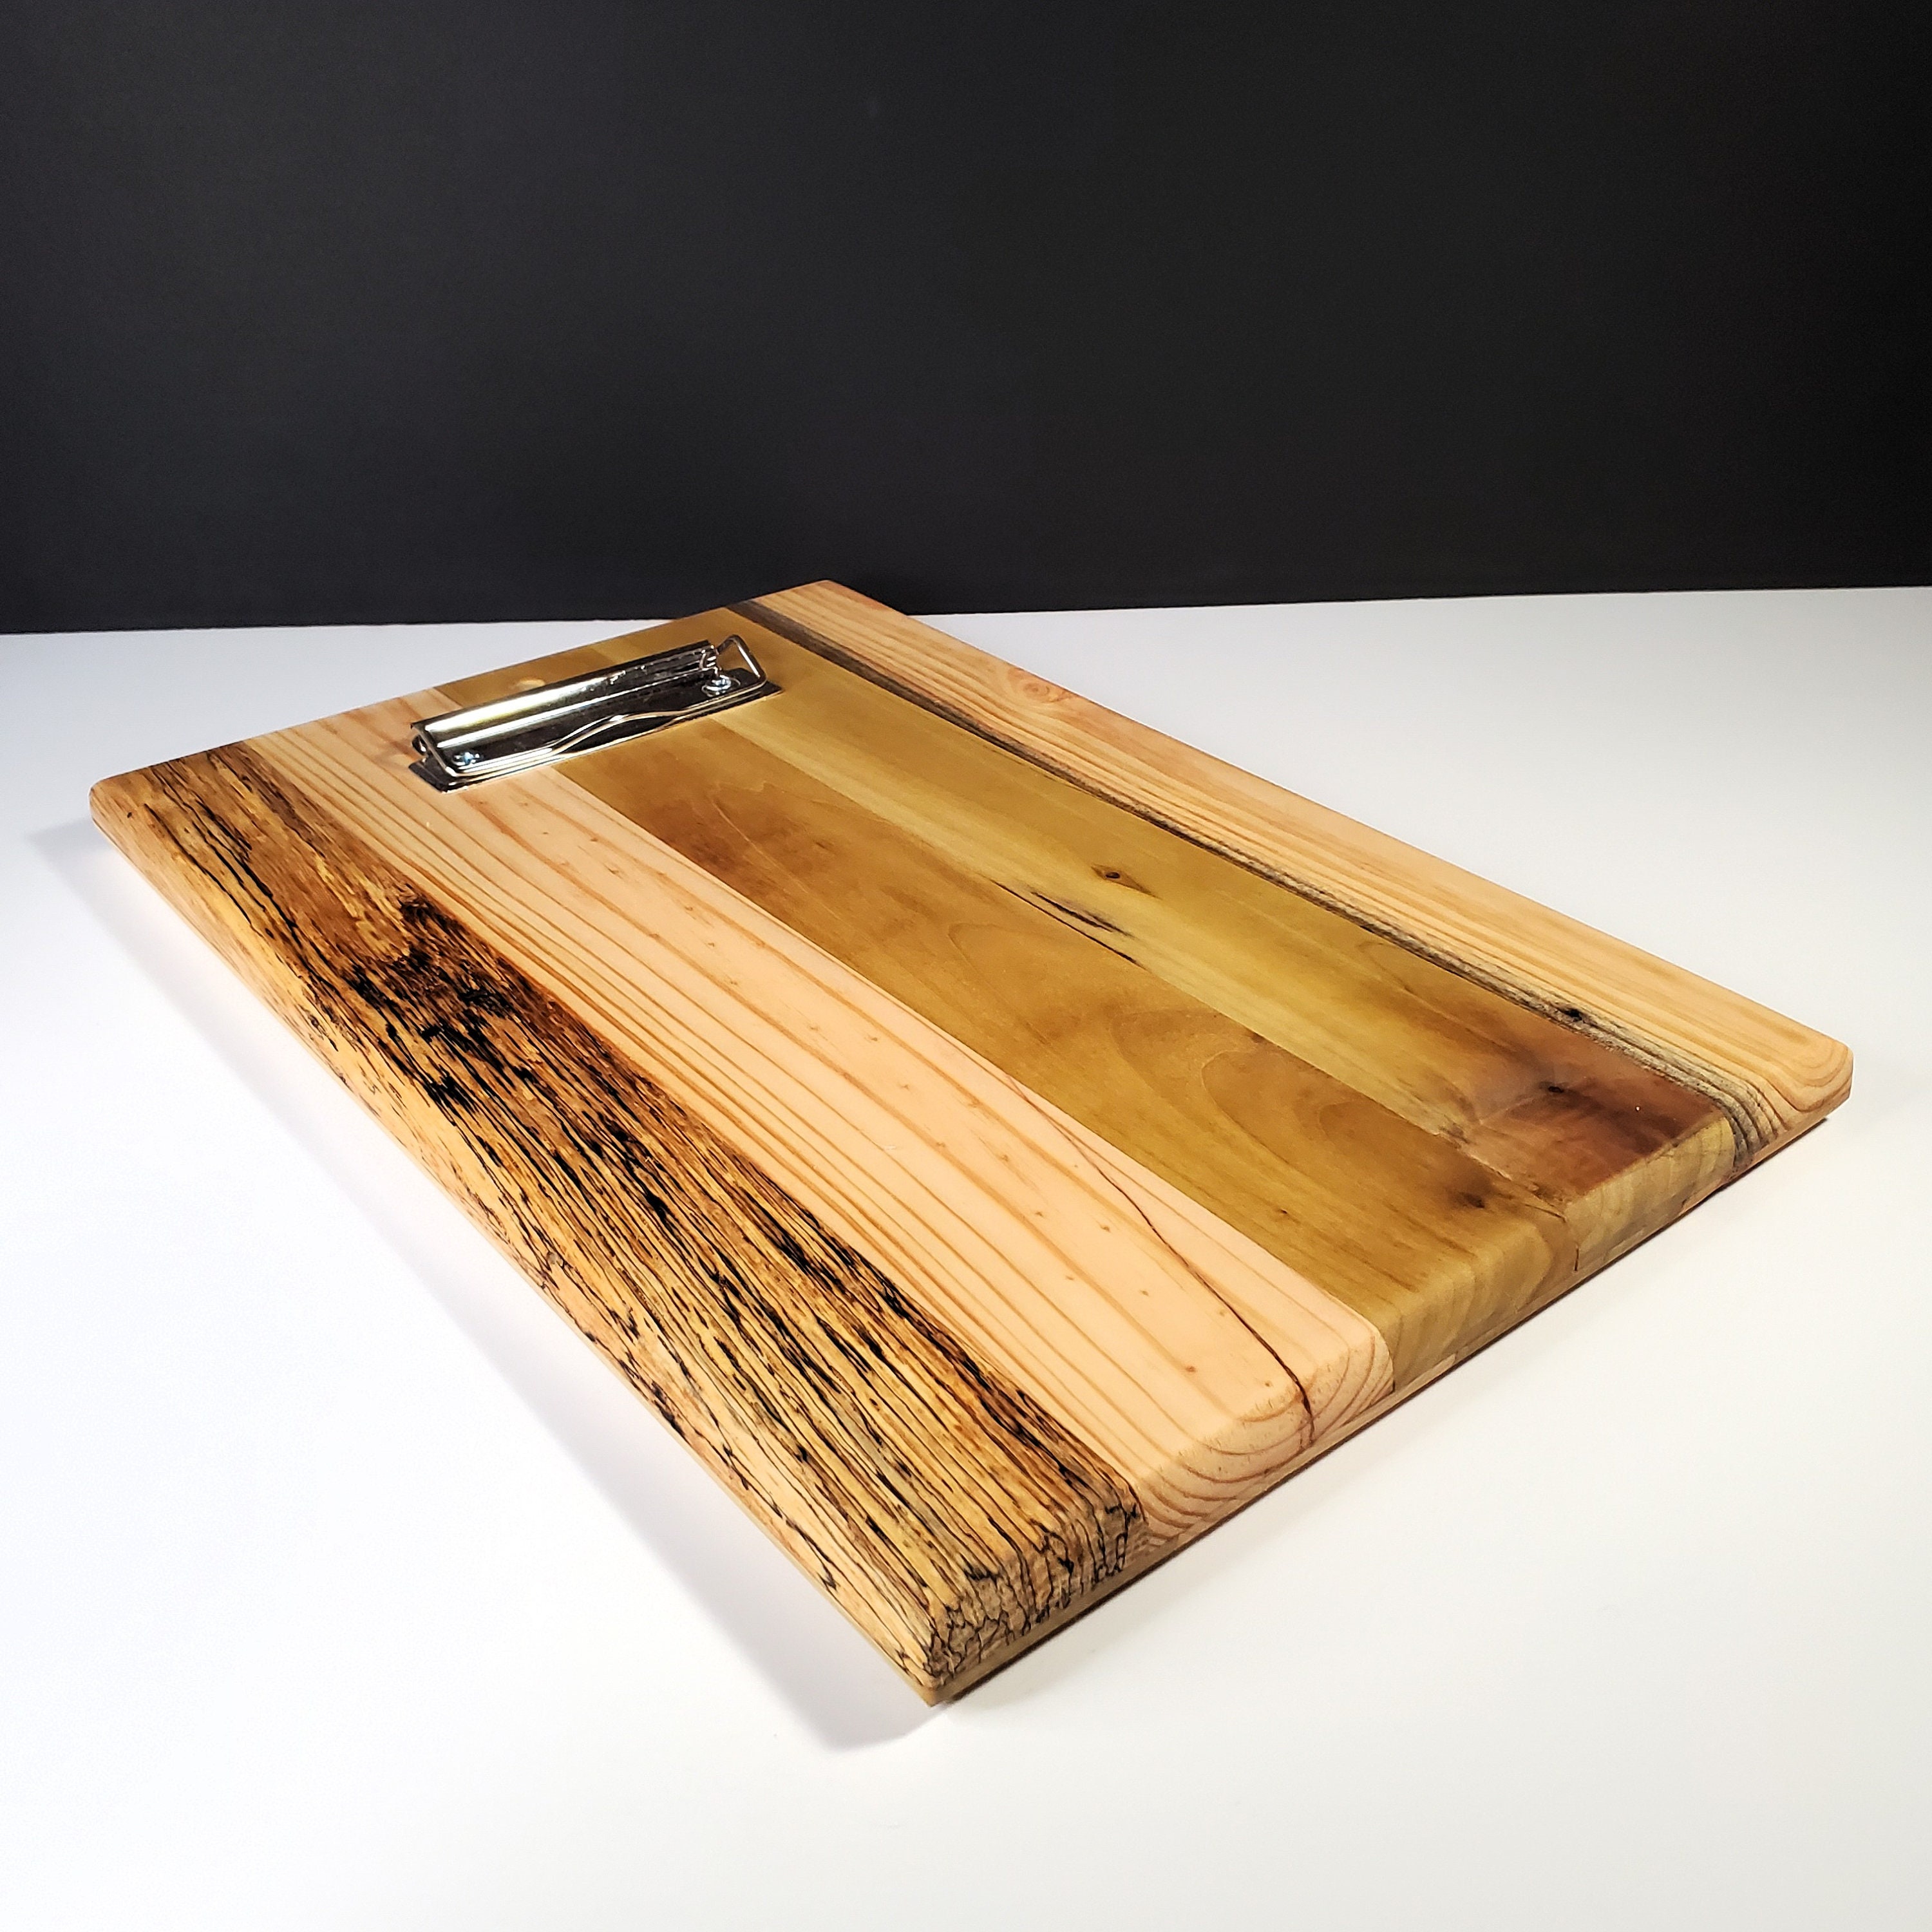 Real Wood Clipboards – Benchmaster WoodworX